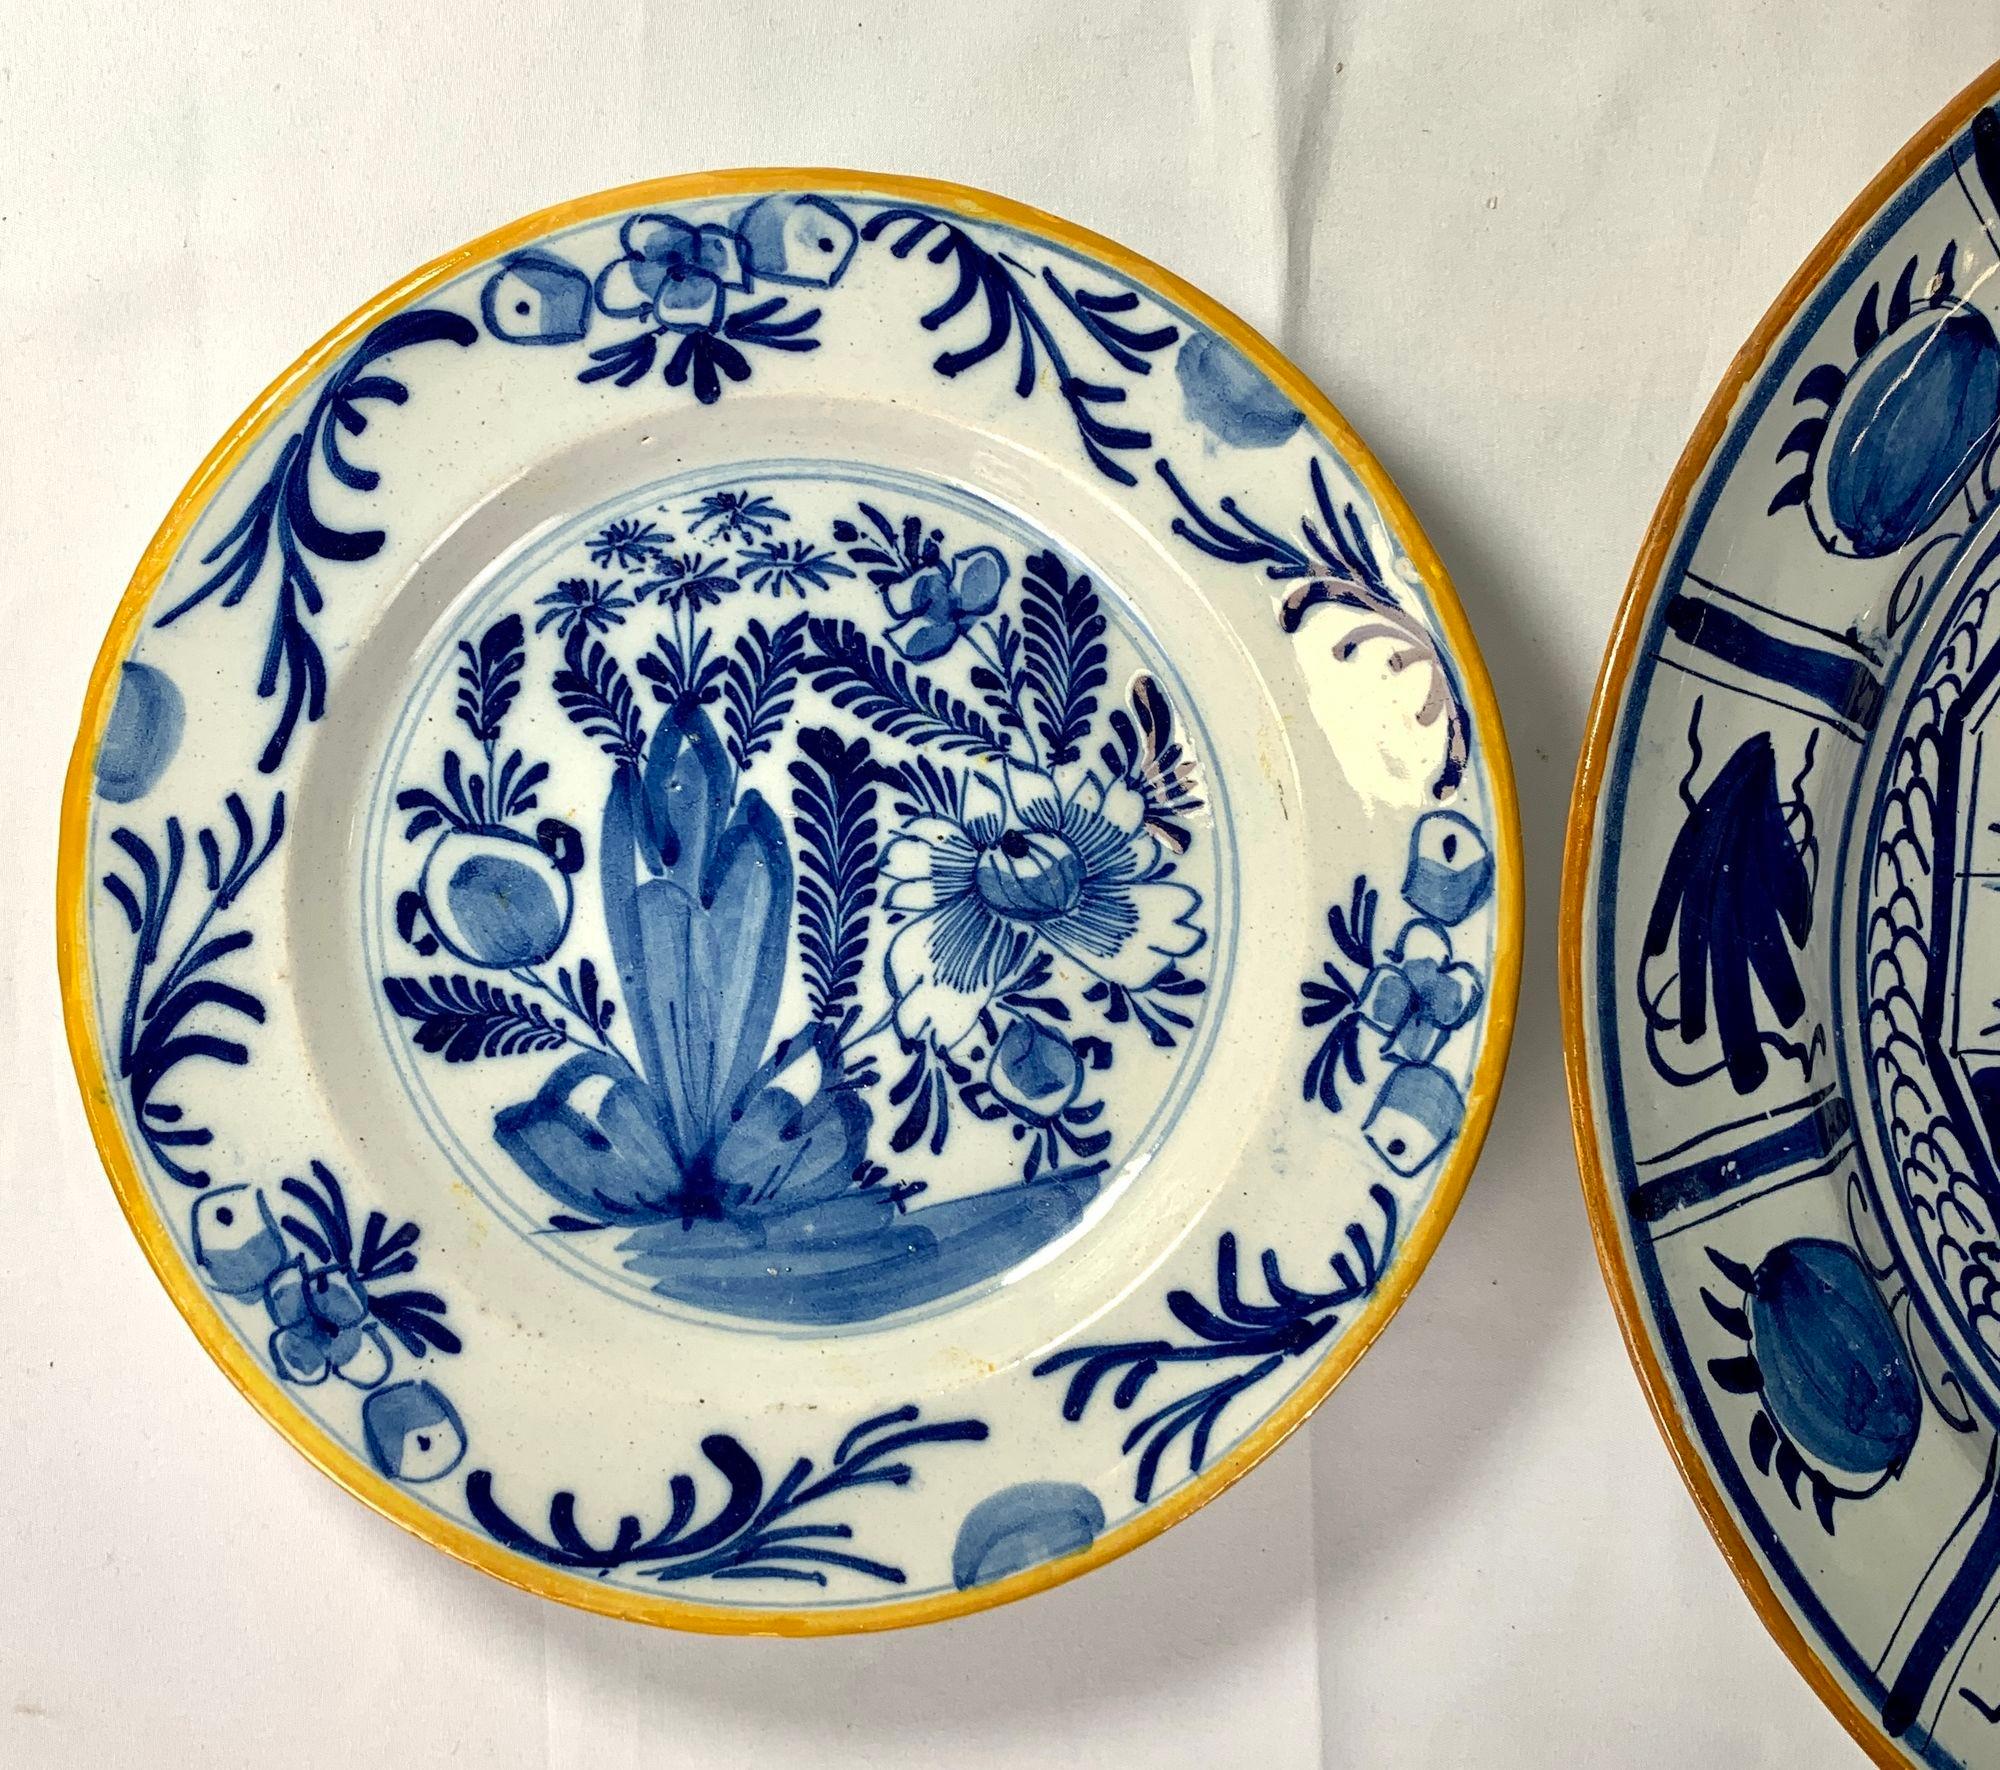 This lovely group of hand painted blue and white Dutch Delft plates features scenes traditional to 18th century Delft.
Each plate is painted in cobalt blue with a traditional yellow or ochre painted edge.
In the group's center, we see a large